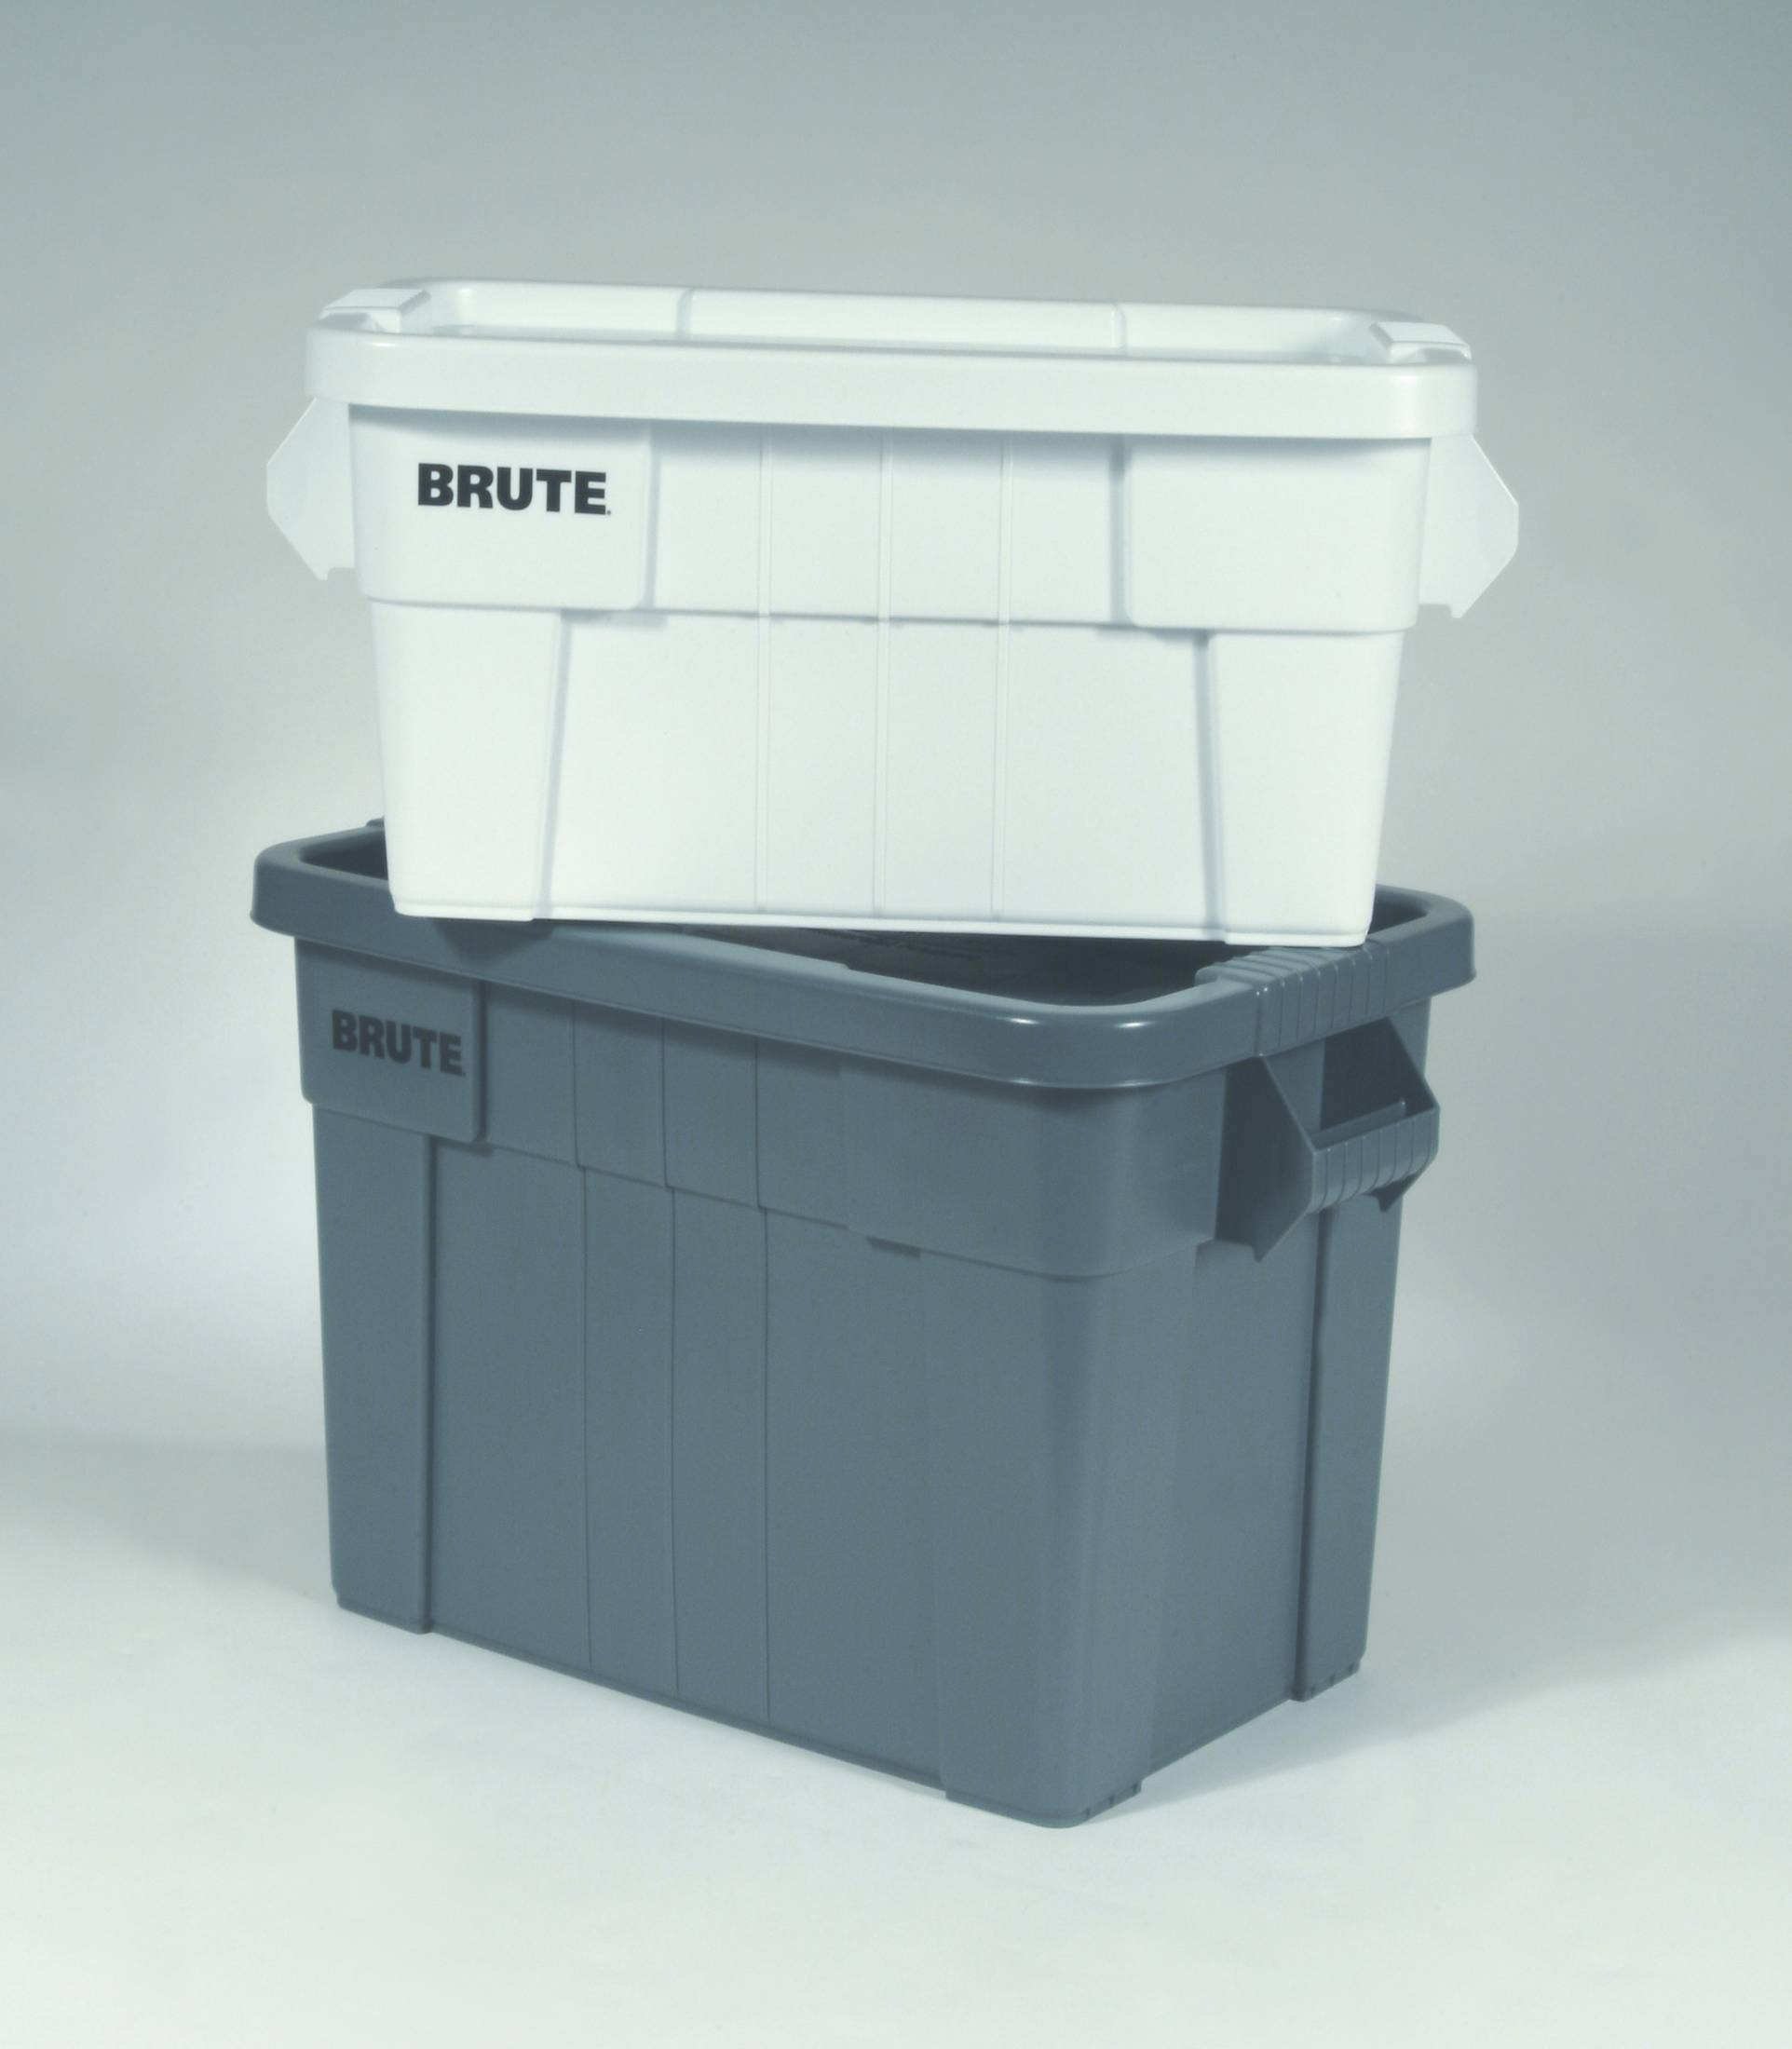 Rubbermaid Commercial Products BRUTE Tote Storage Container 20